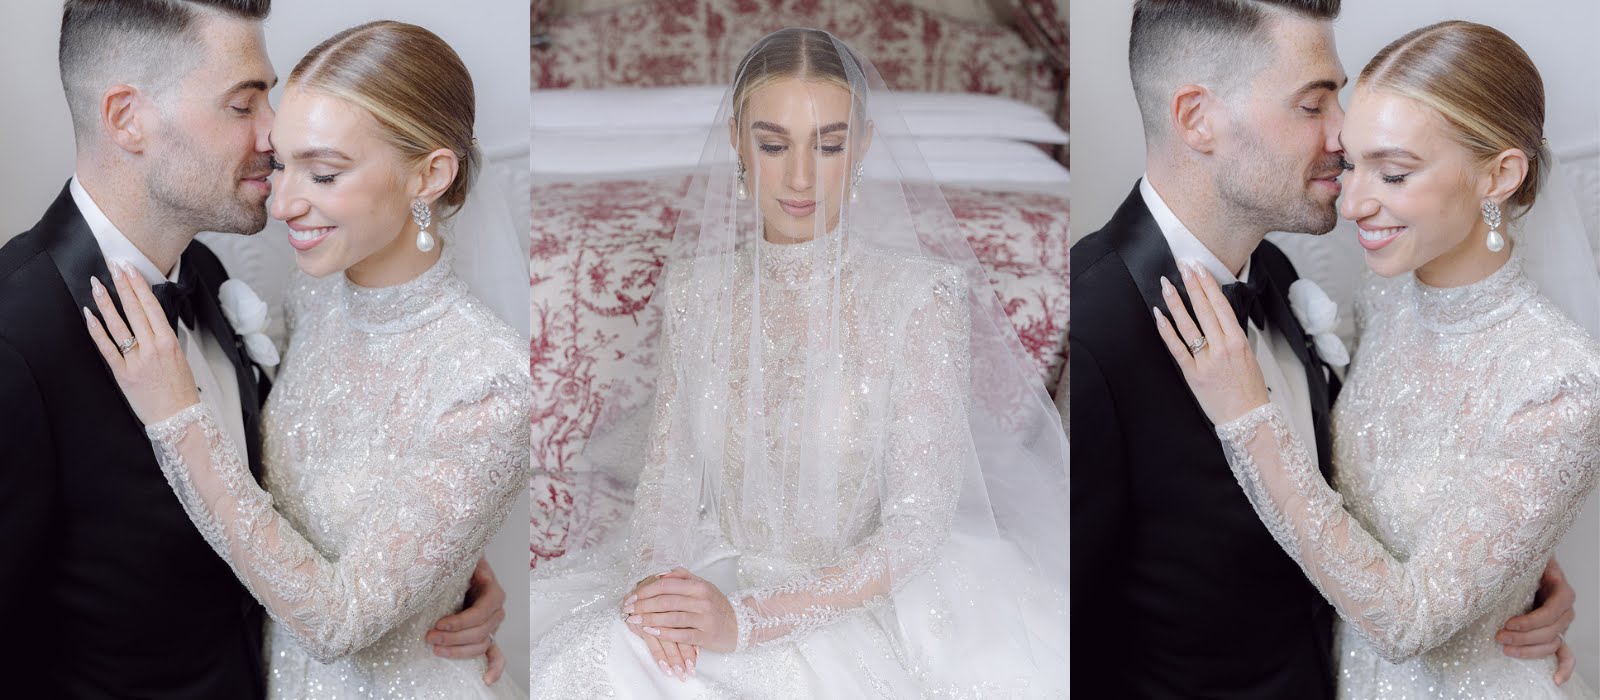 Real Weddings: Victoria and Cormac’s ethereal white wedding in Dublin